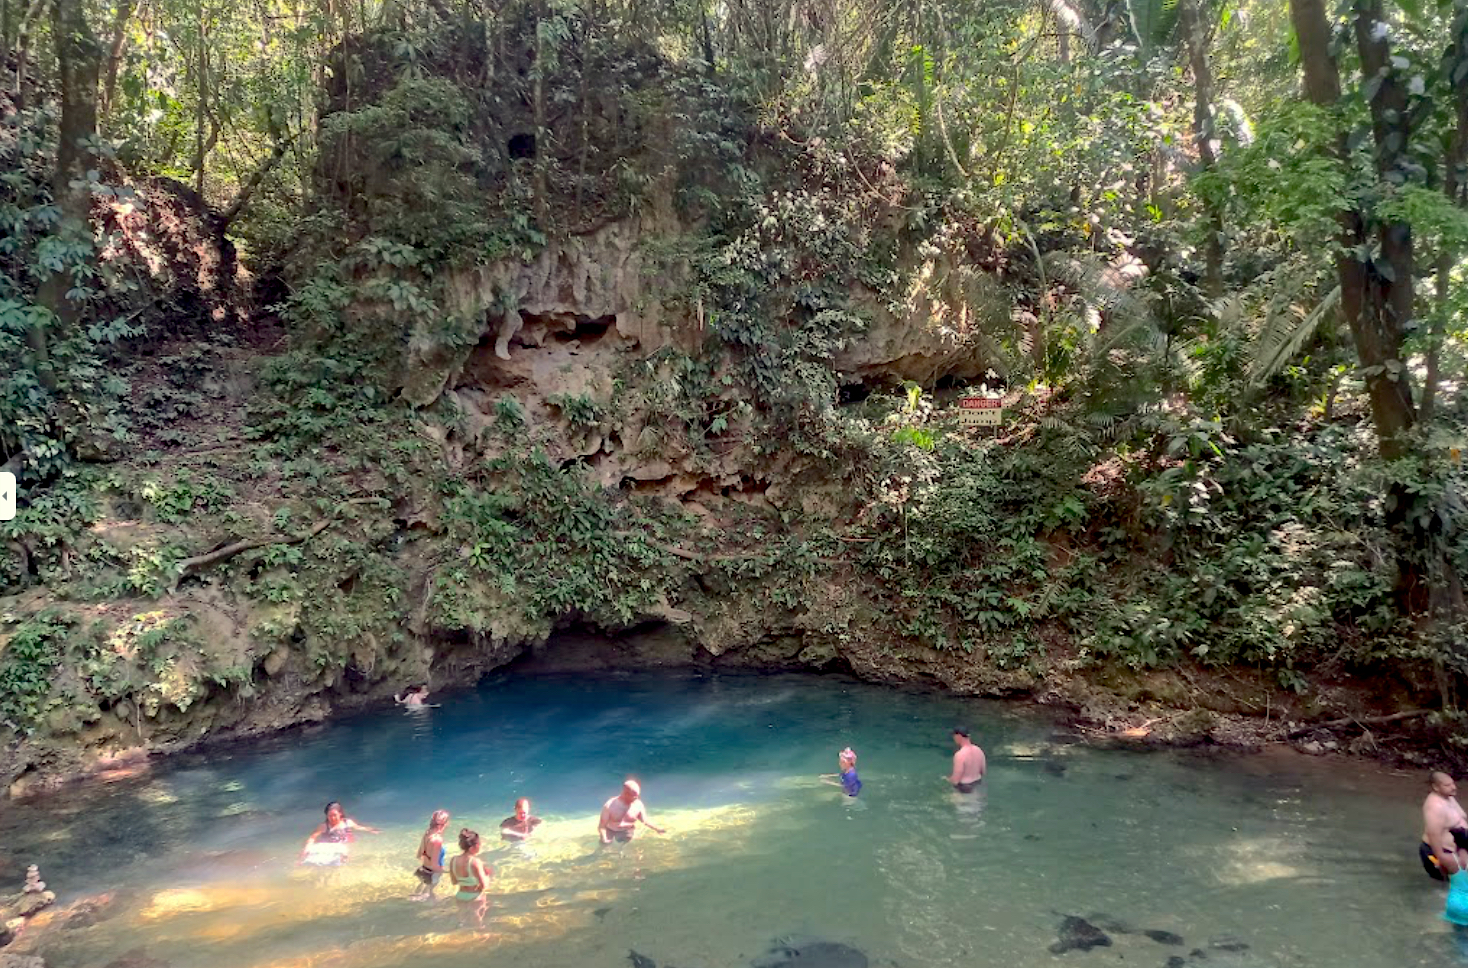 St. Hermans Blue Hole a cenote in belize